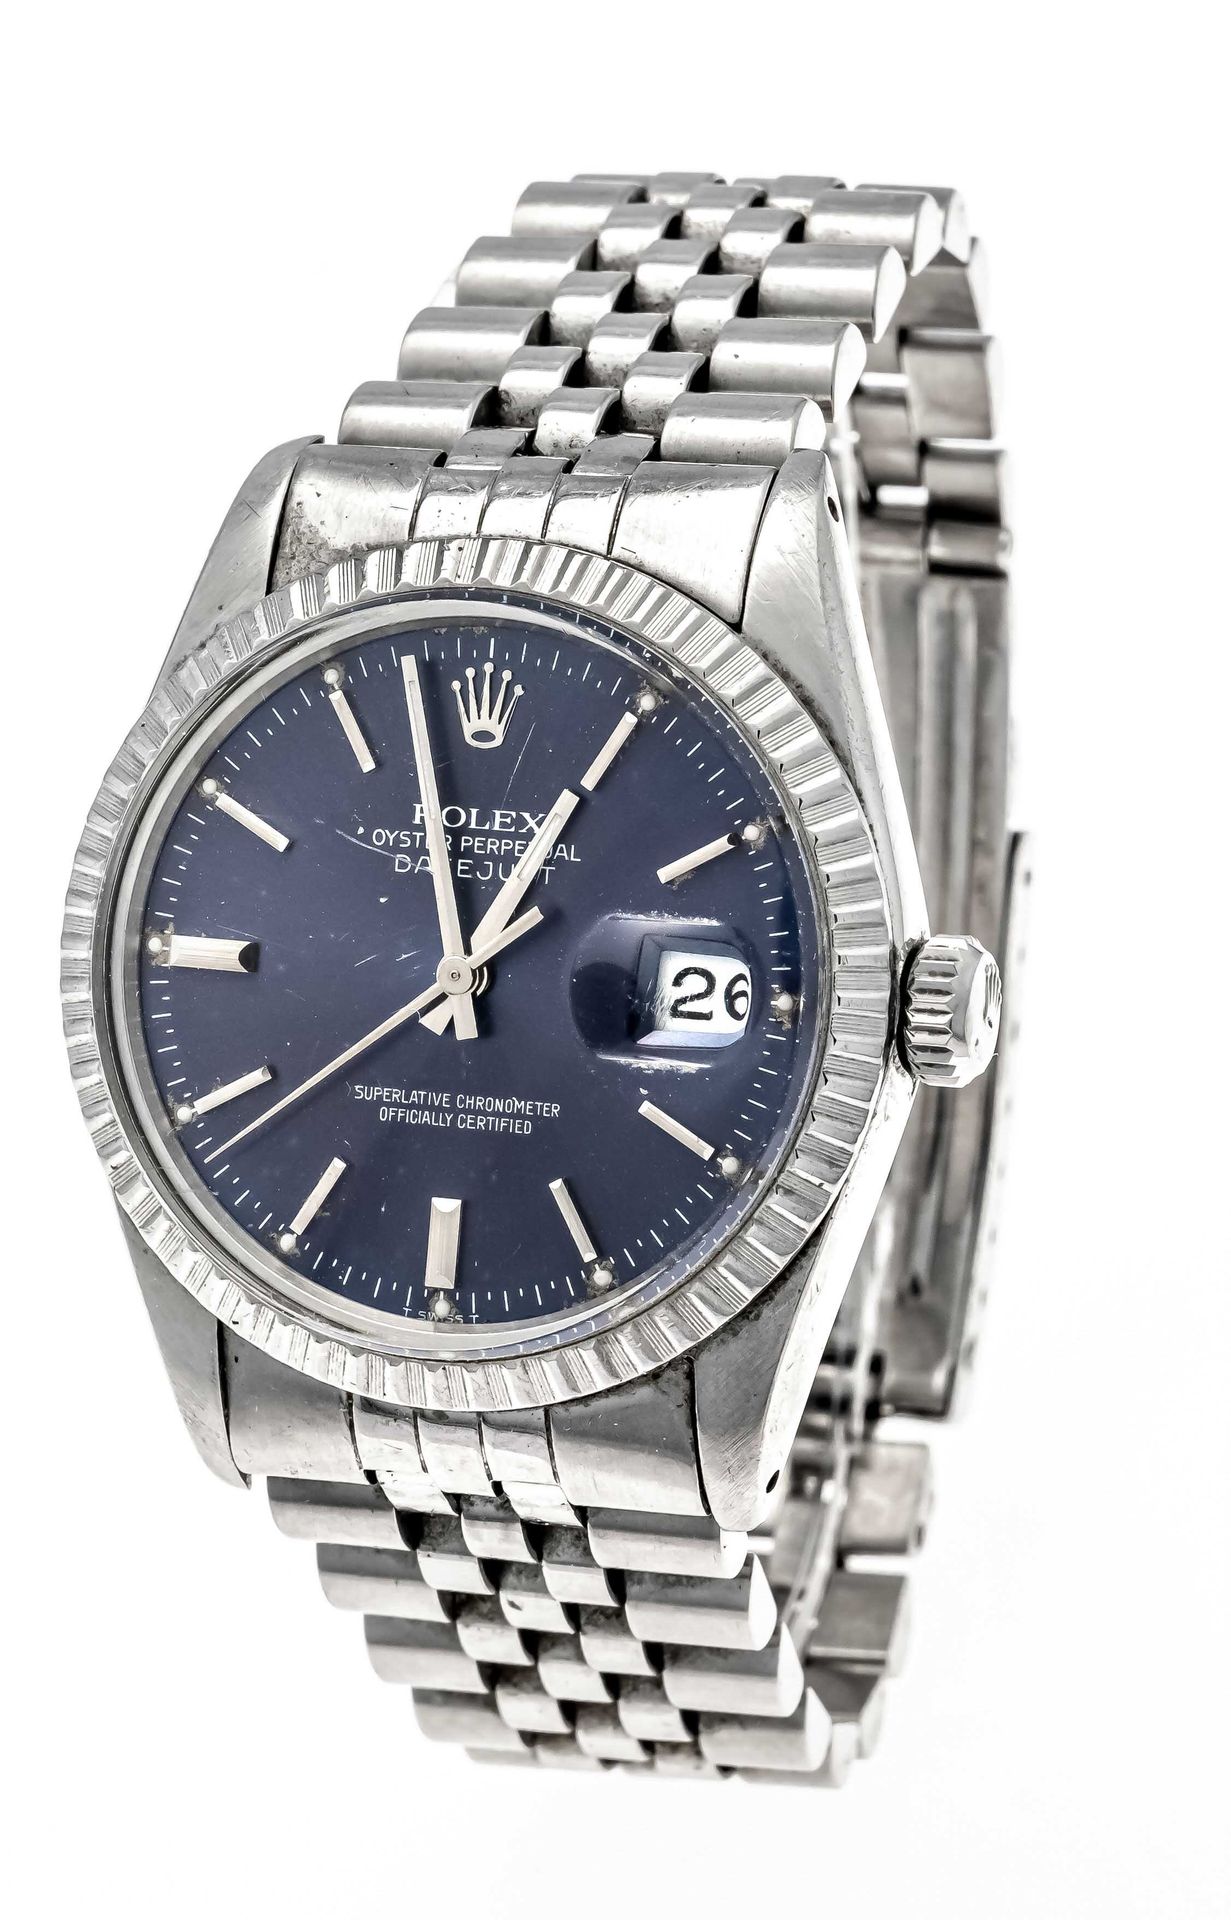 Null Rolex Datejust, Oyster Perpetual, Chronometer, Ref. 16030, circa 1980, stee&hellip;